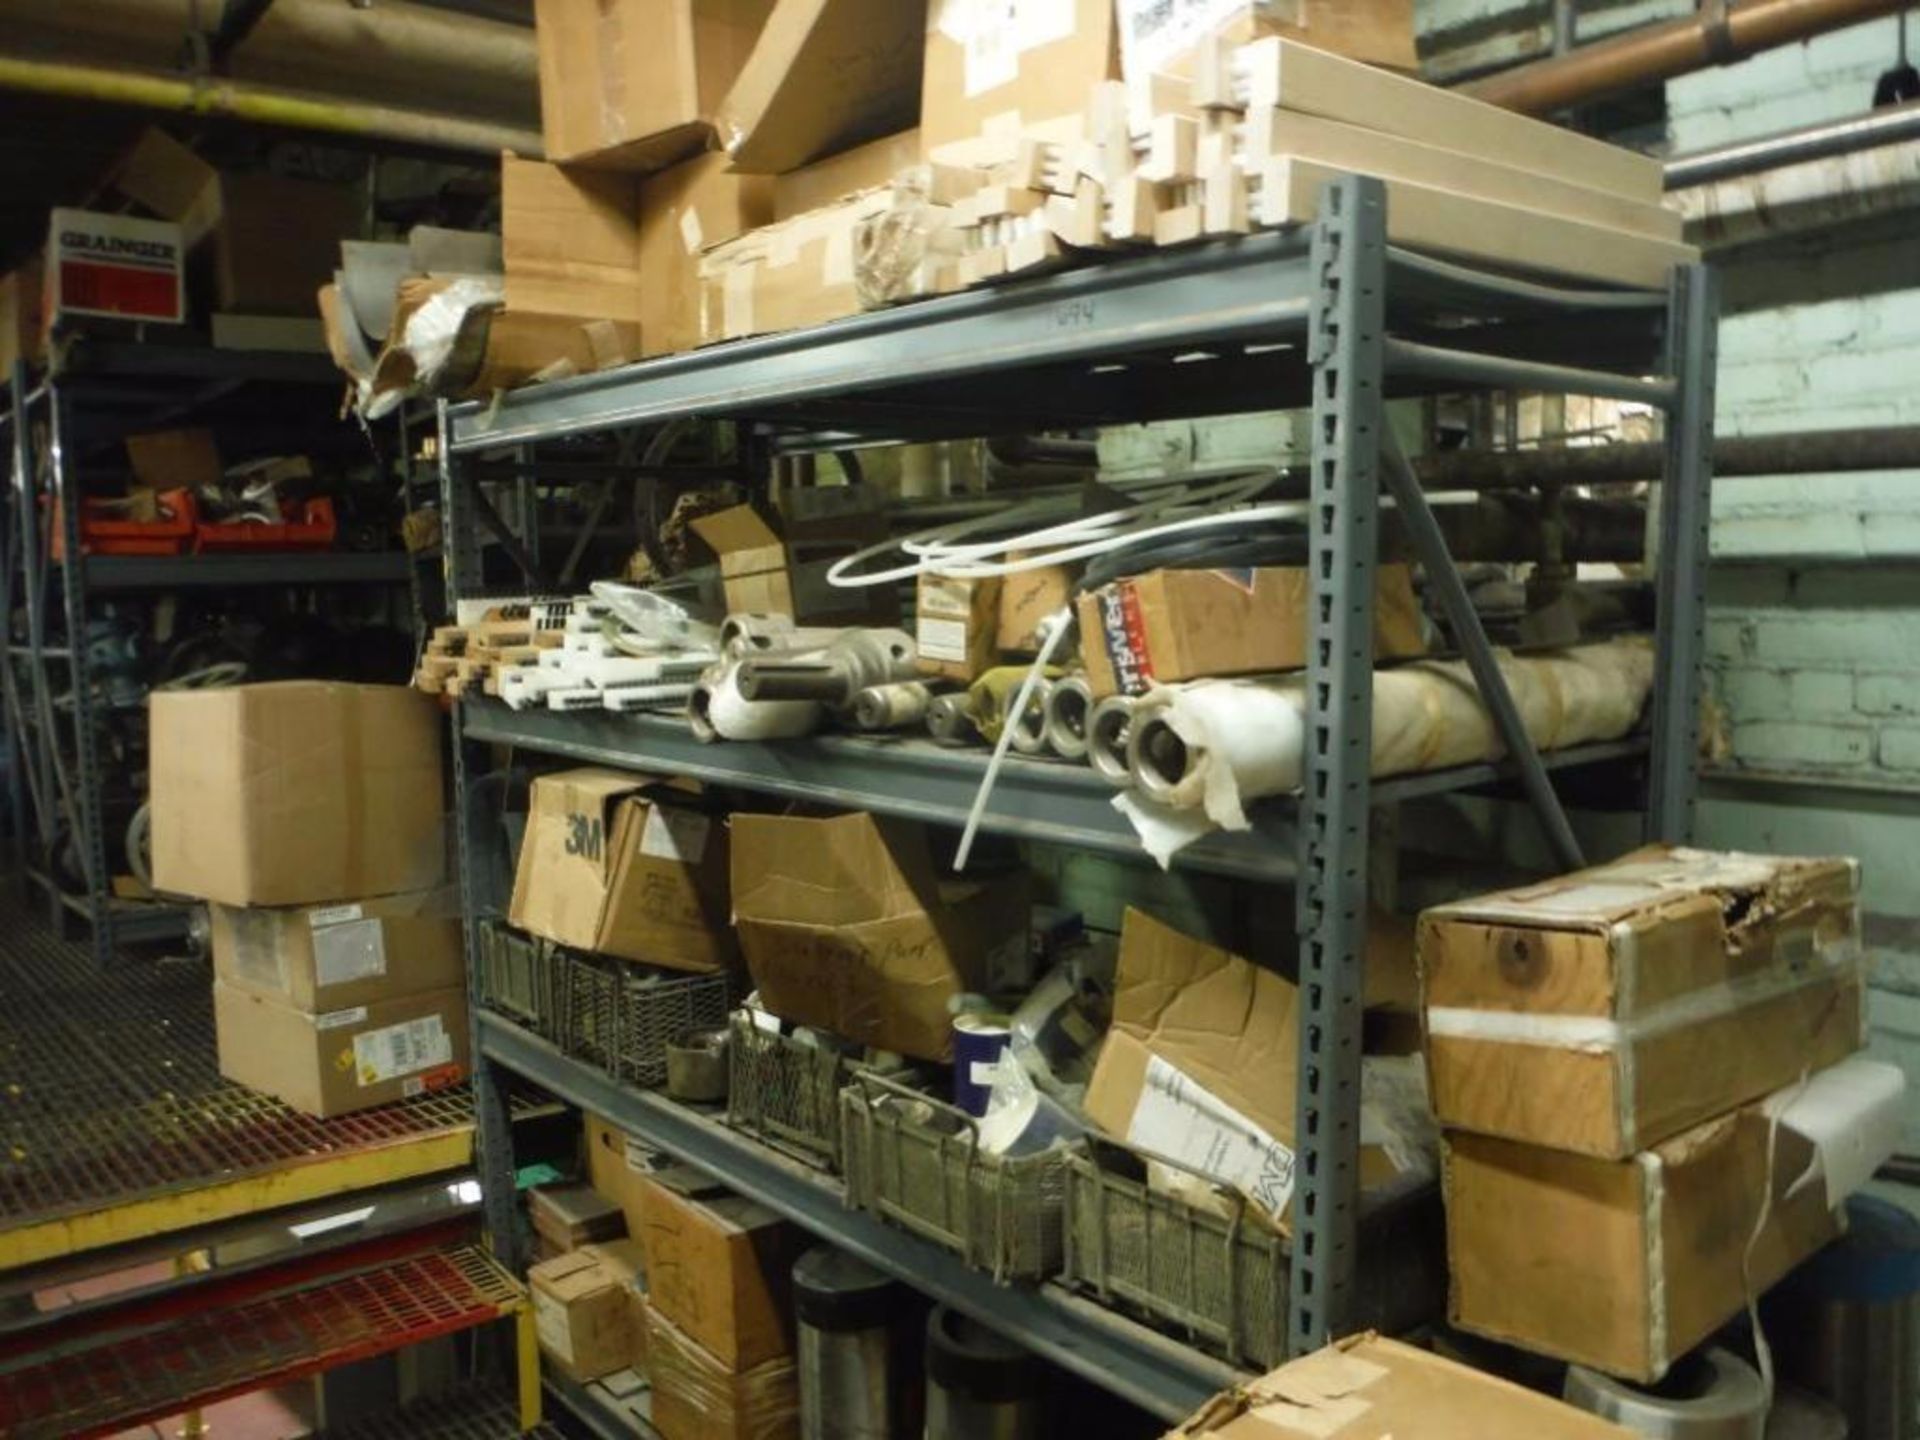 10 Shelves & content: Miscellaneous valves, fittings, brushes, and parts  Rigging Fee: $1000